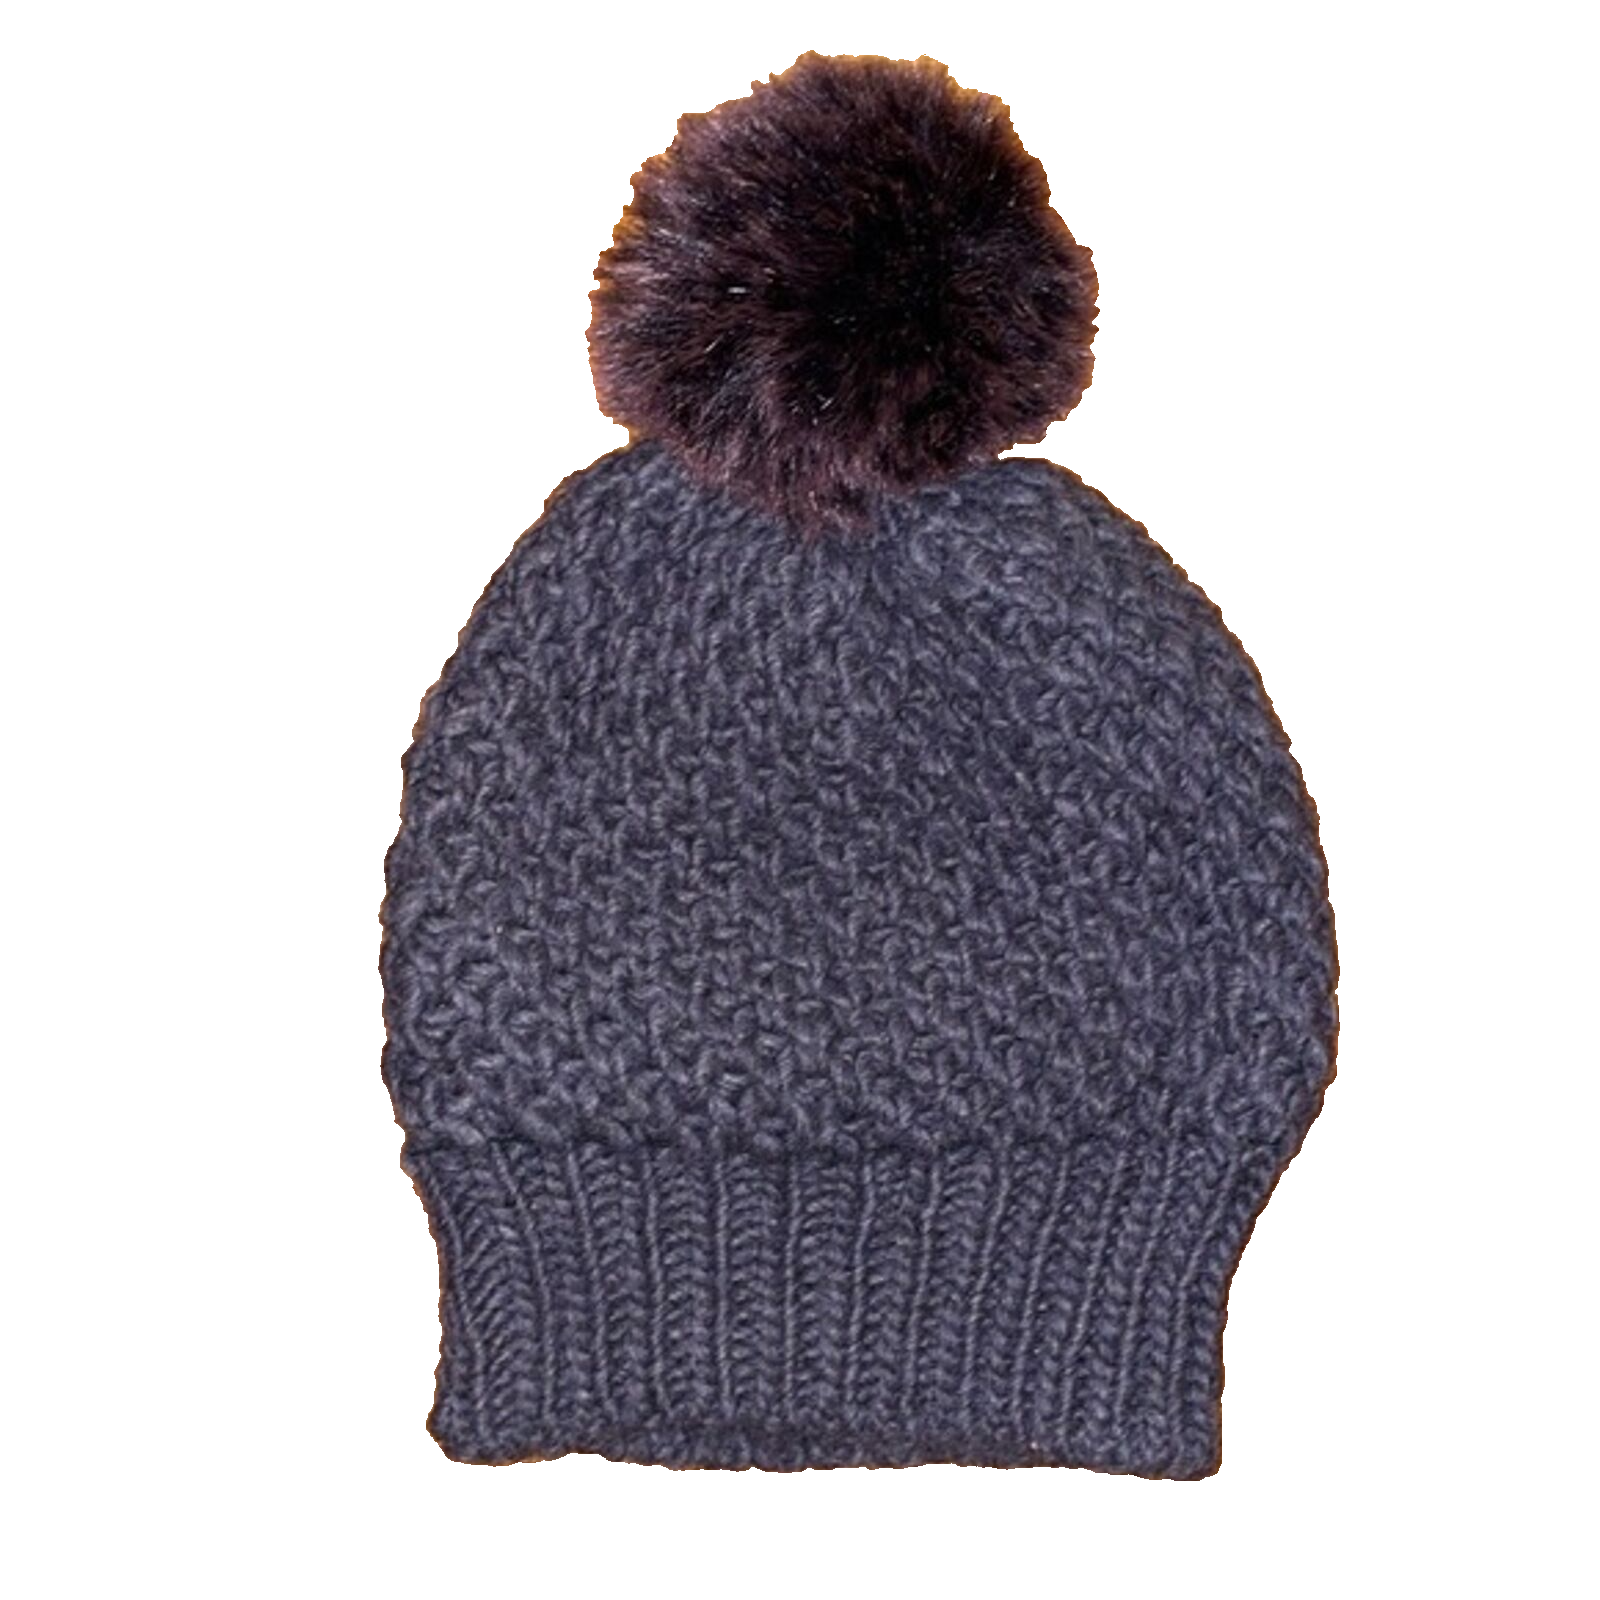 Primary image for Purple Wool Blend Knit Pom Beanie Hat Cap Womens OS